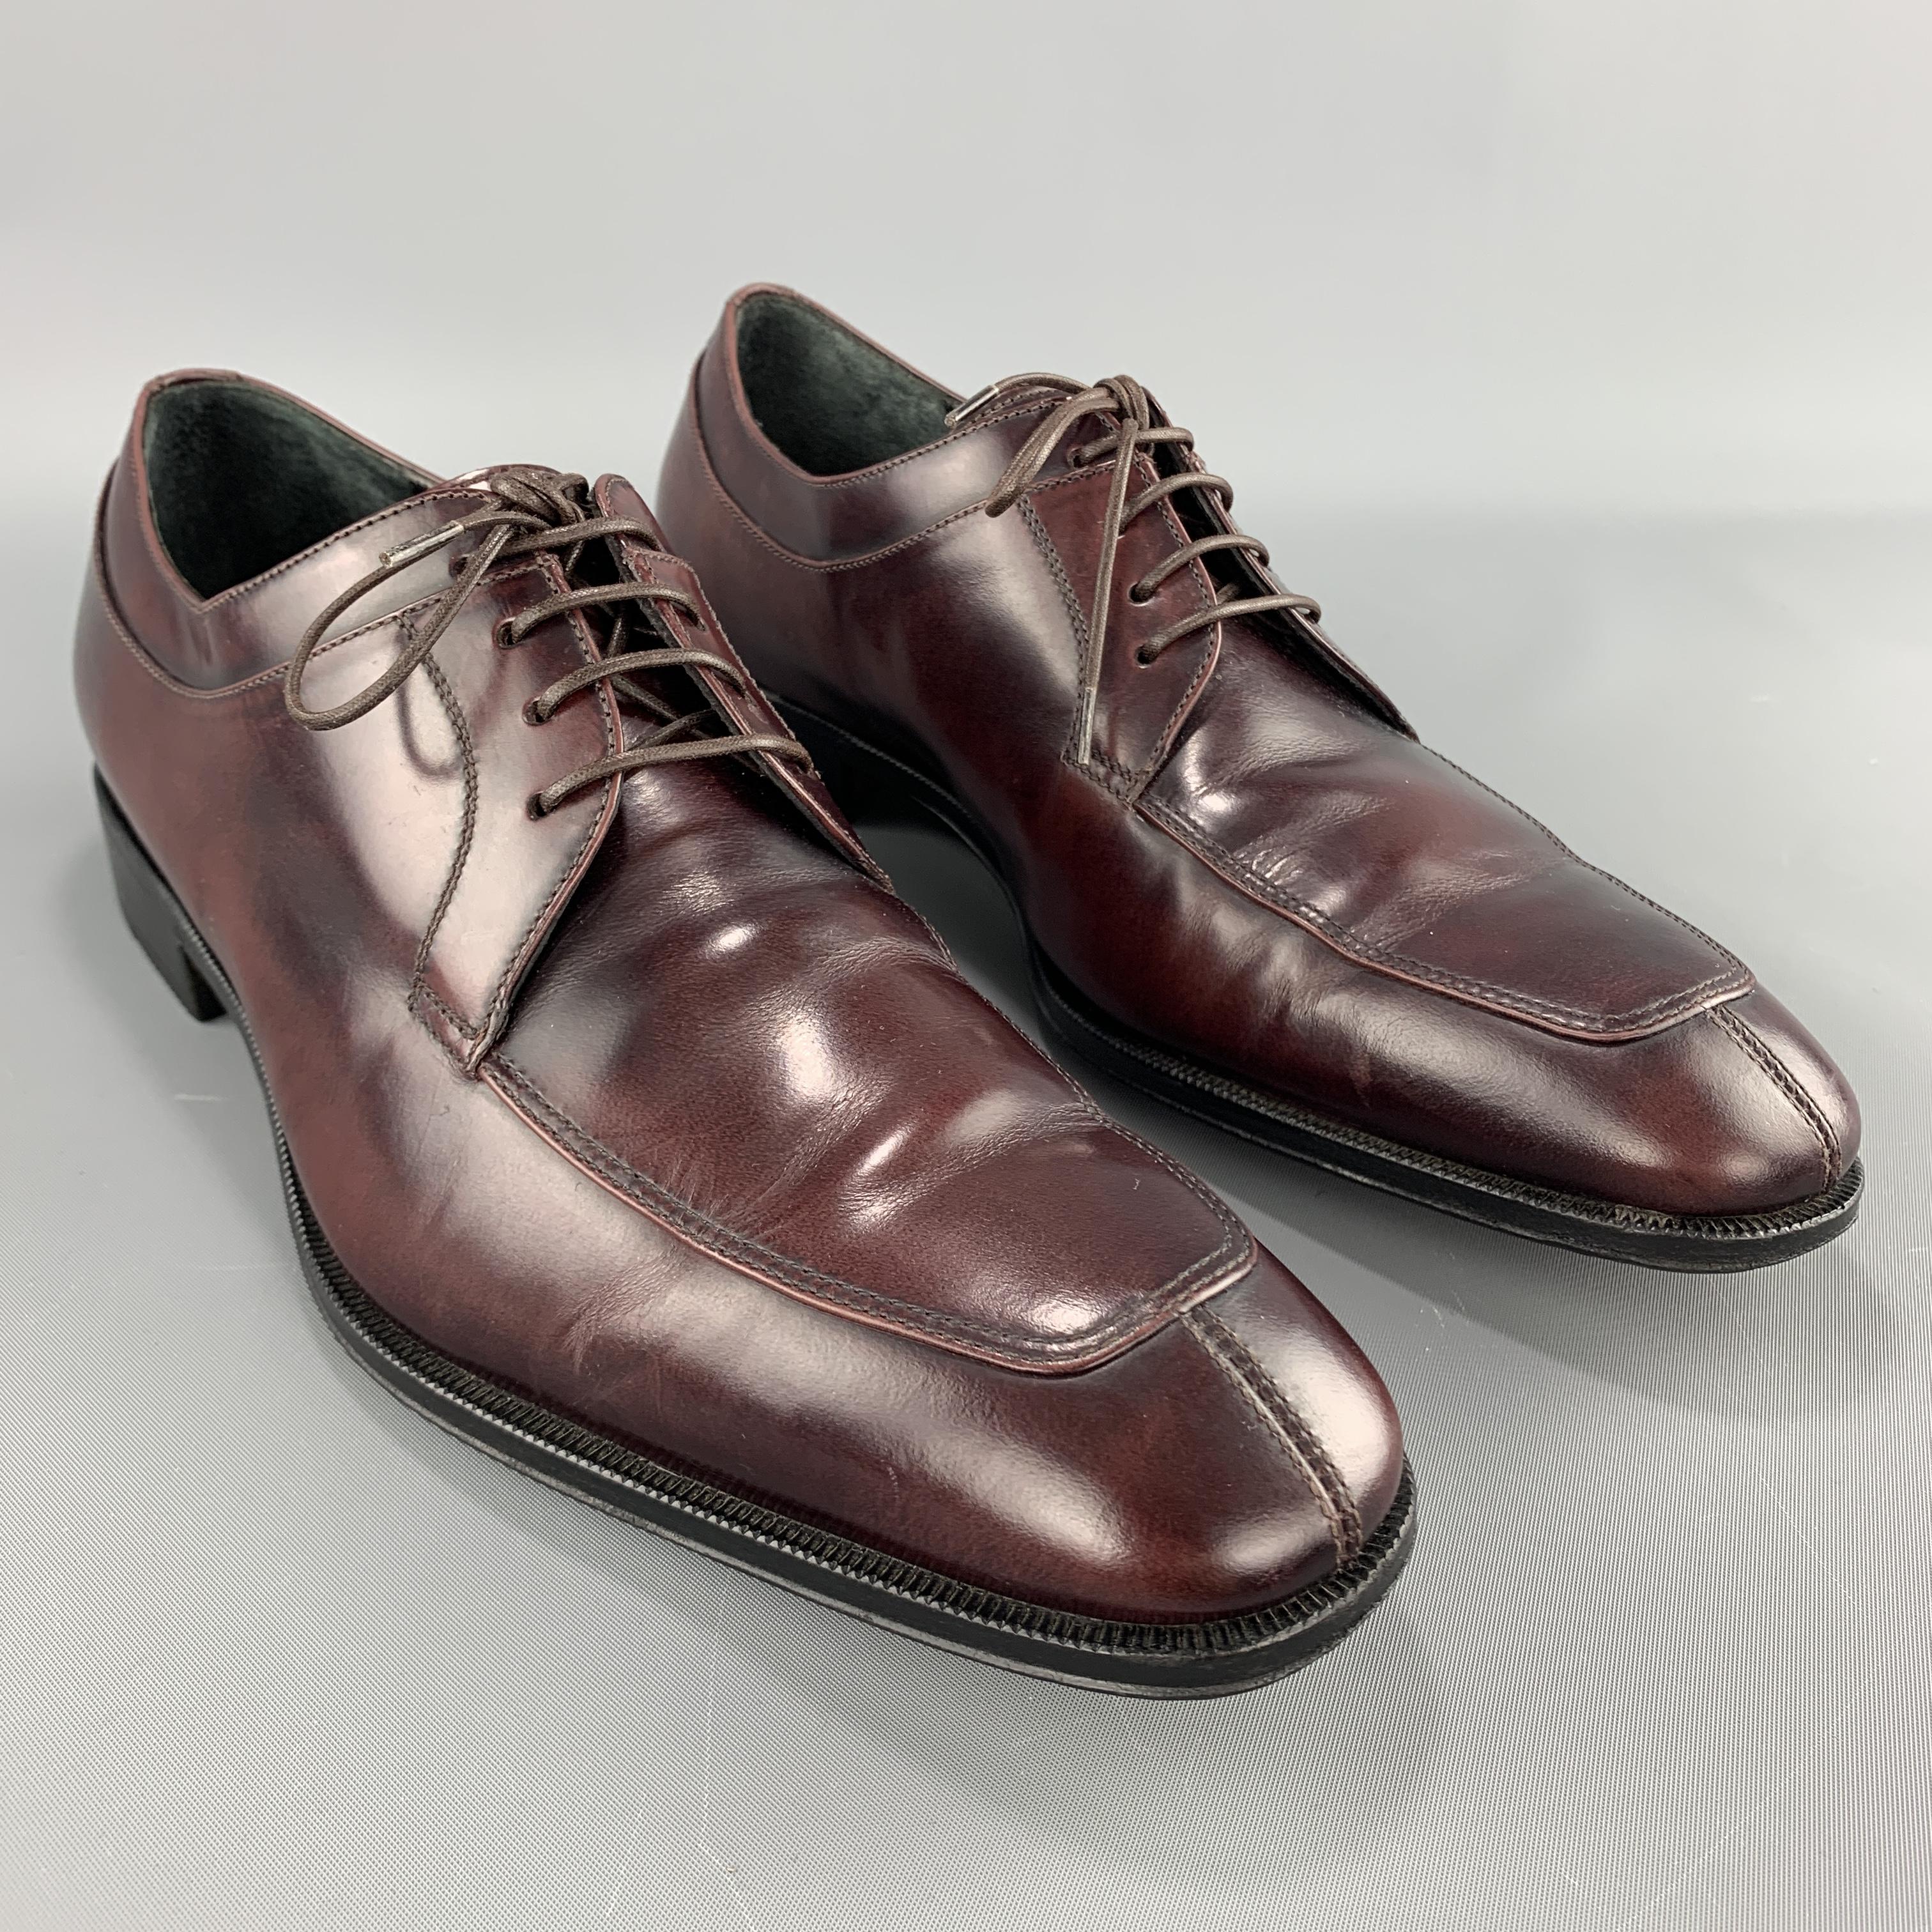 SALVATORE FERRAGAMO dress shoes come in burgundy antique leather with a split apron toe. Made in Italy.

Excellent Pre-Owned Condition.
Marked: 8

Outsole: 11.5 x 4 in.